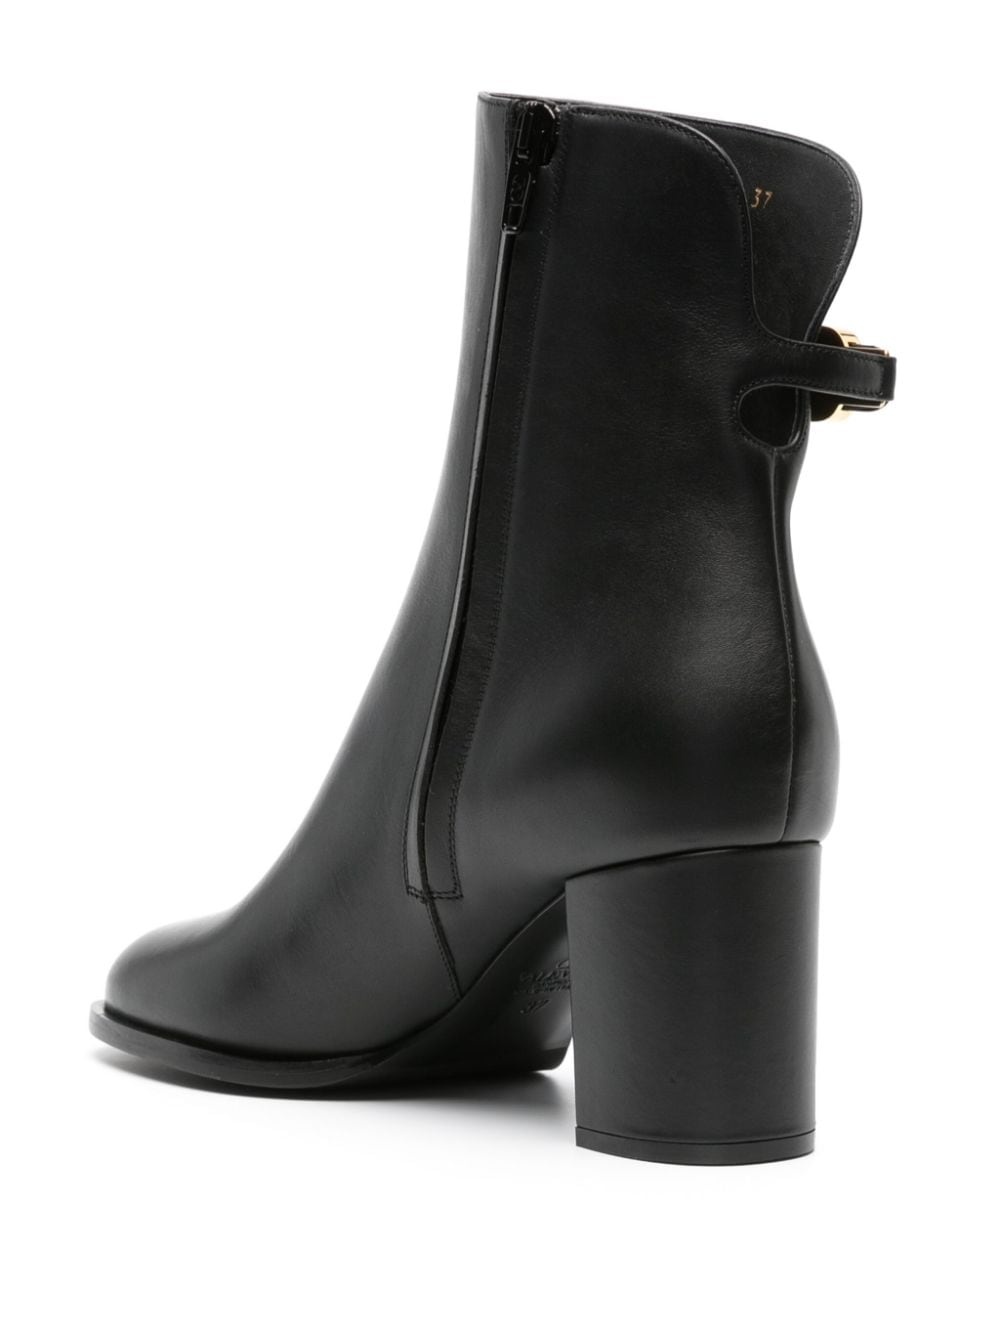 VLogo Signature 70mm leather boots - 3